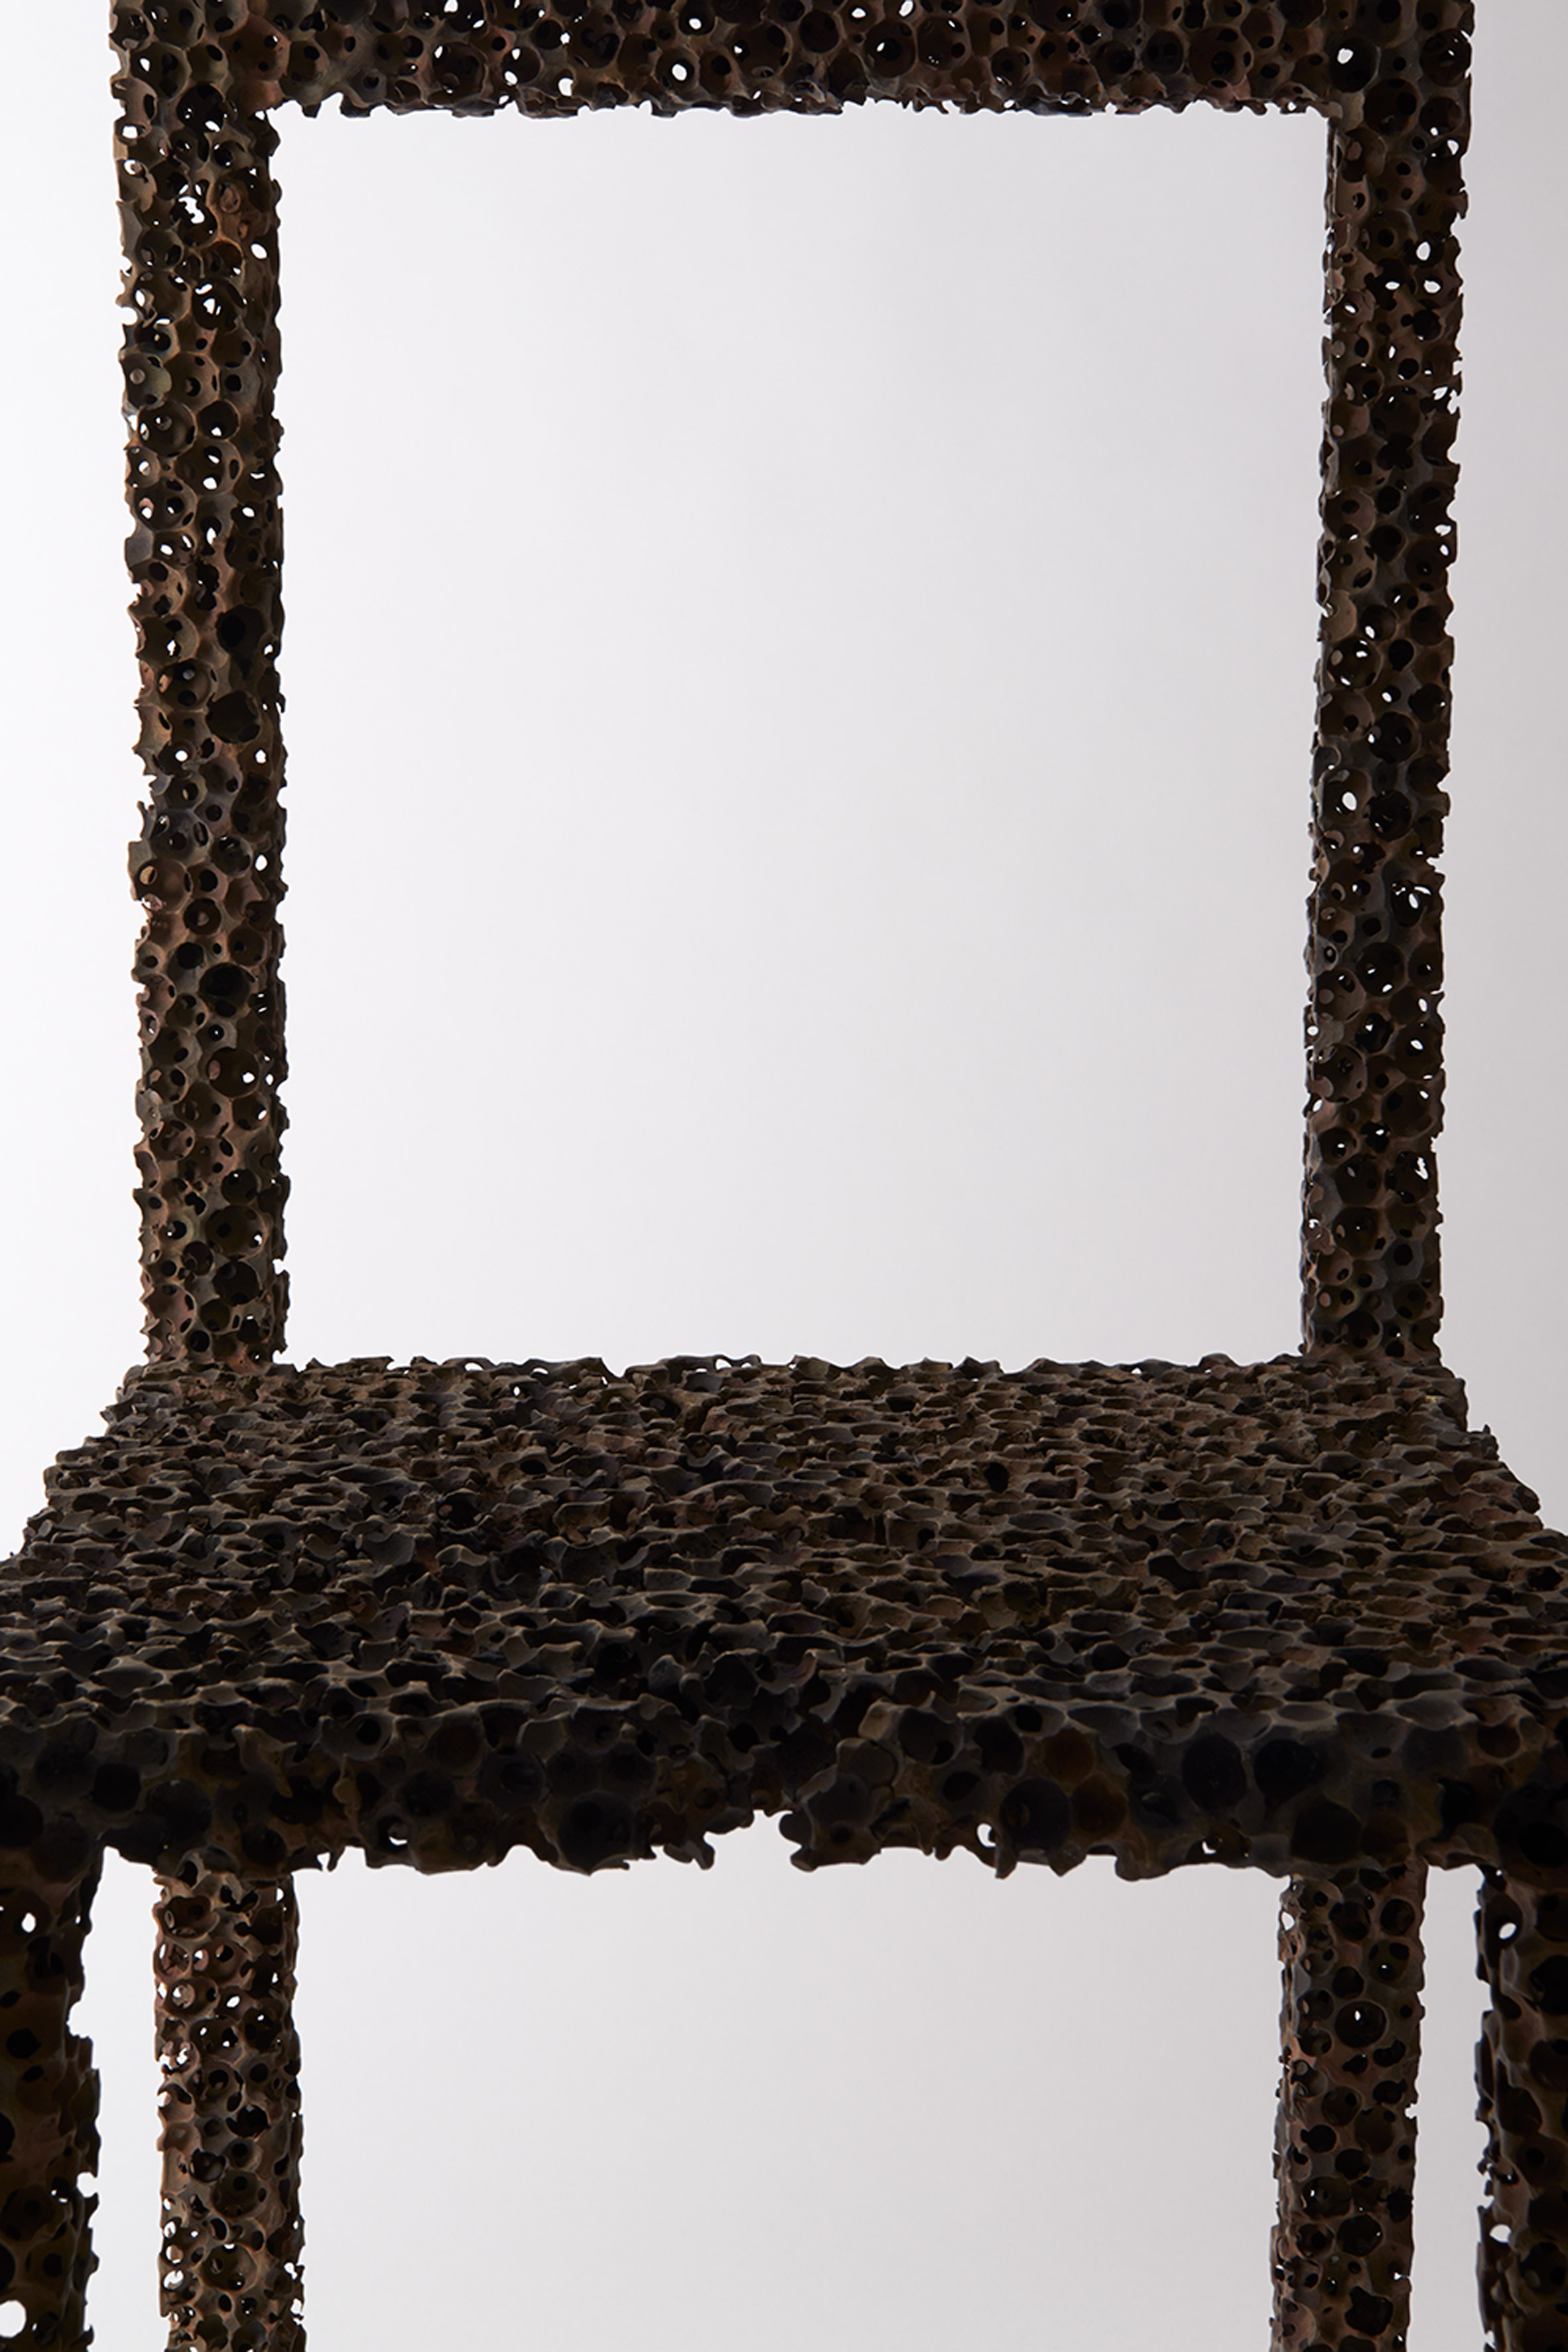 Pockmarked Drought chair by We+ takes shape as it dries